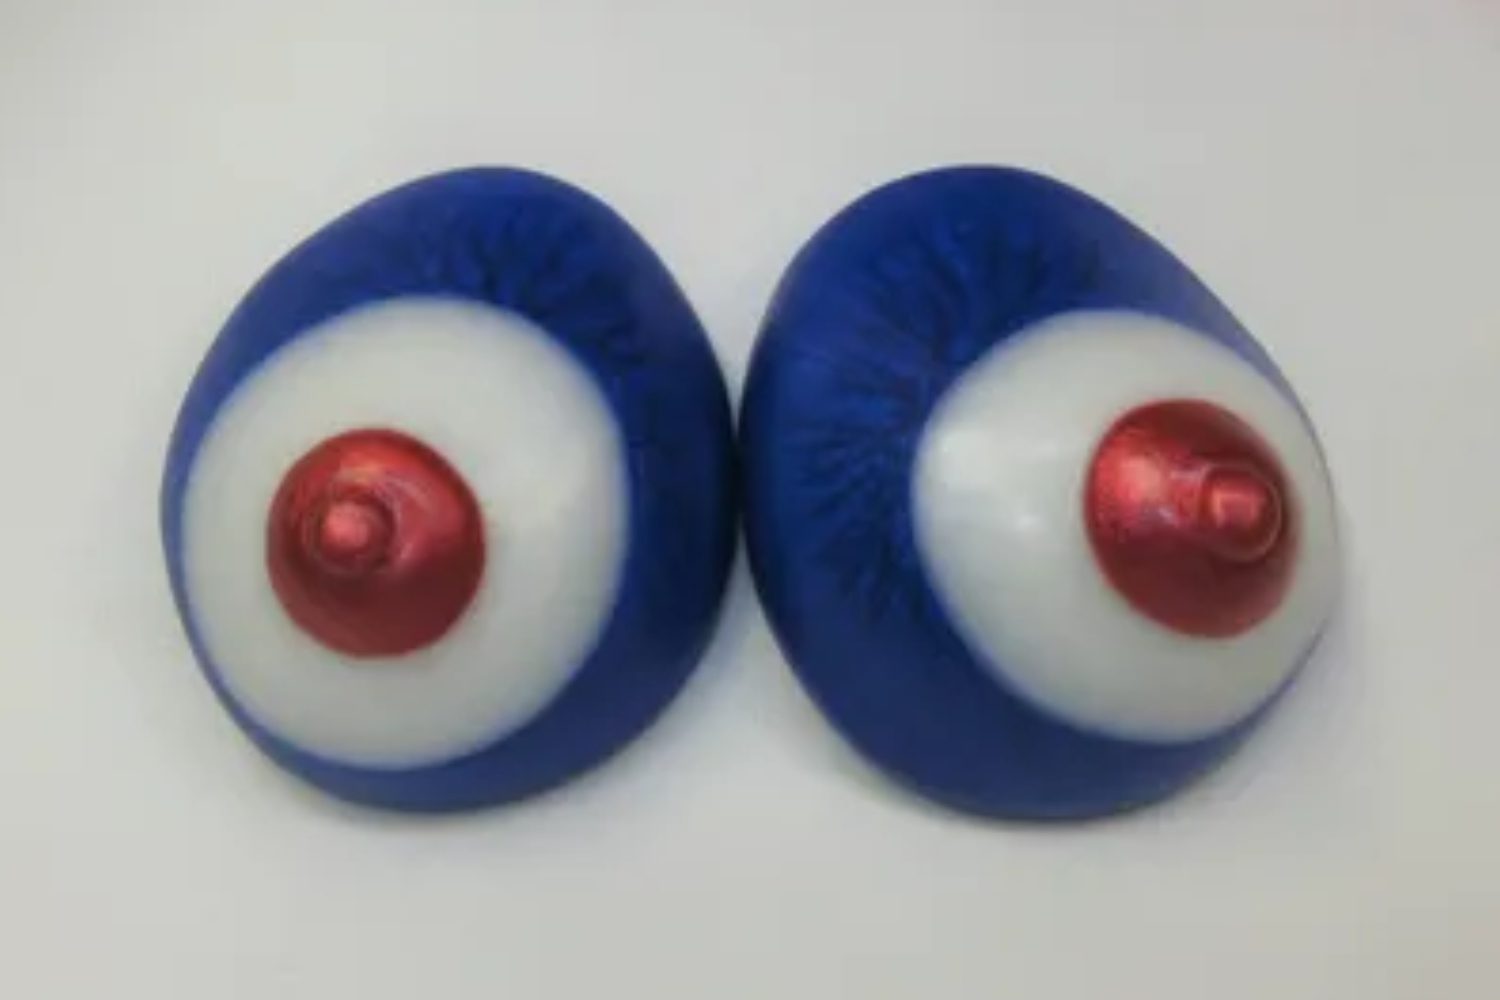 A pair of blue and white eyes with red accents.